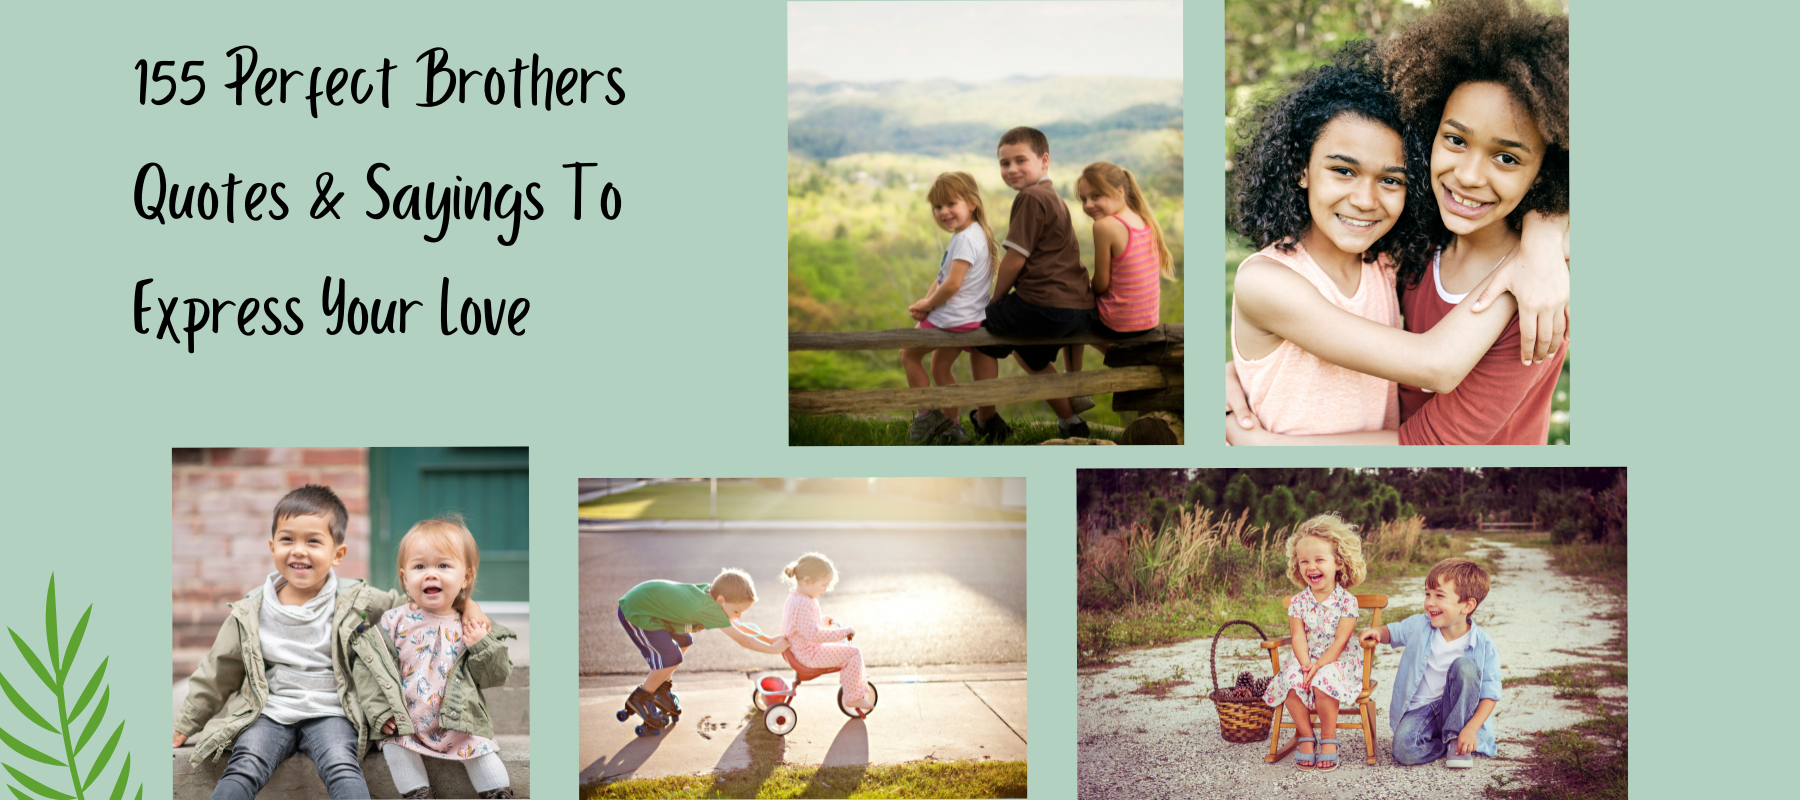 155 Best Brother Quotes & Sayings To Express Your Love